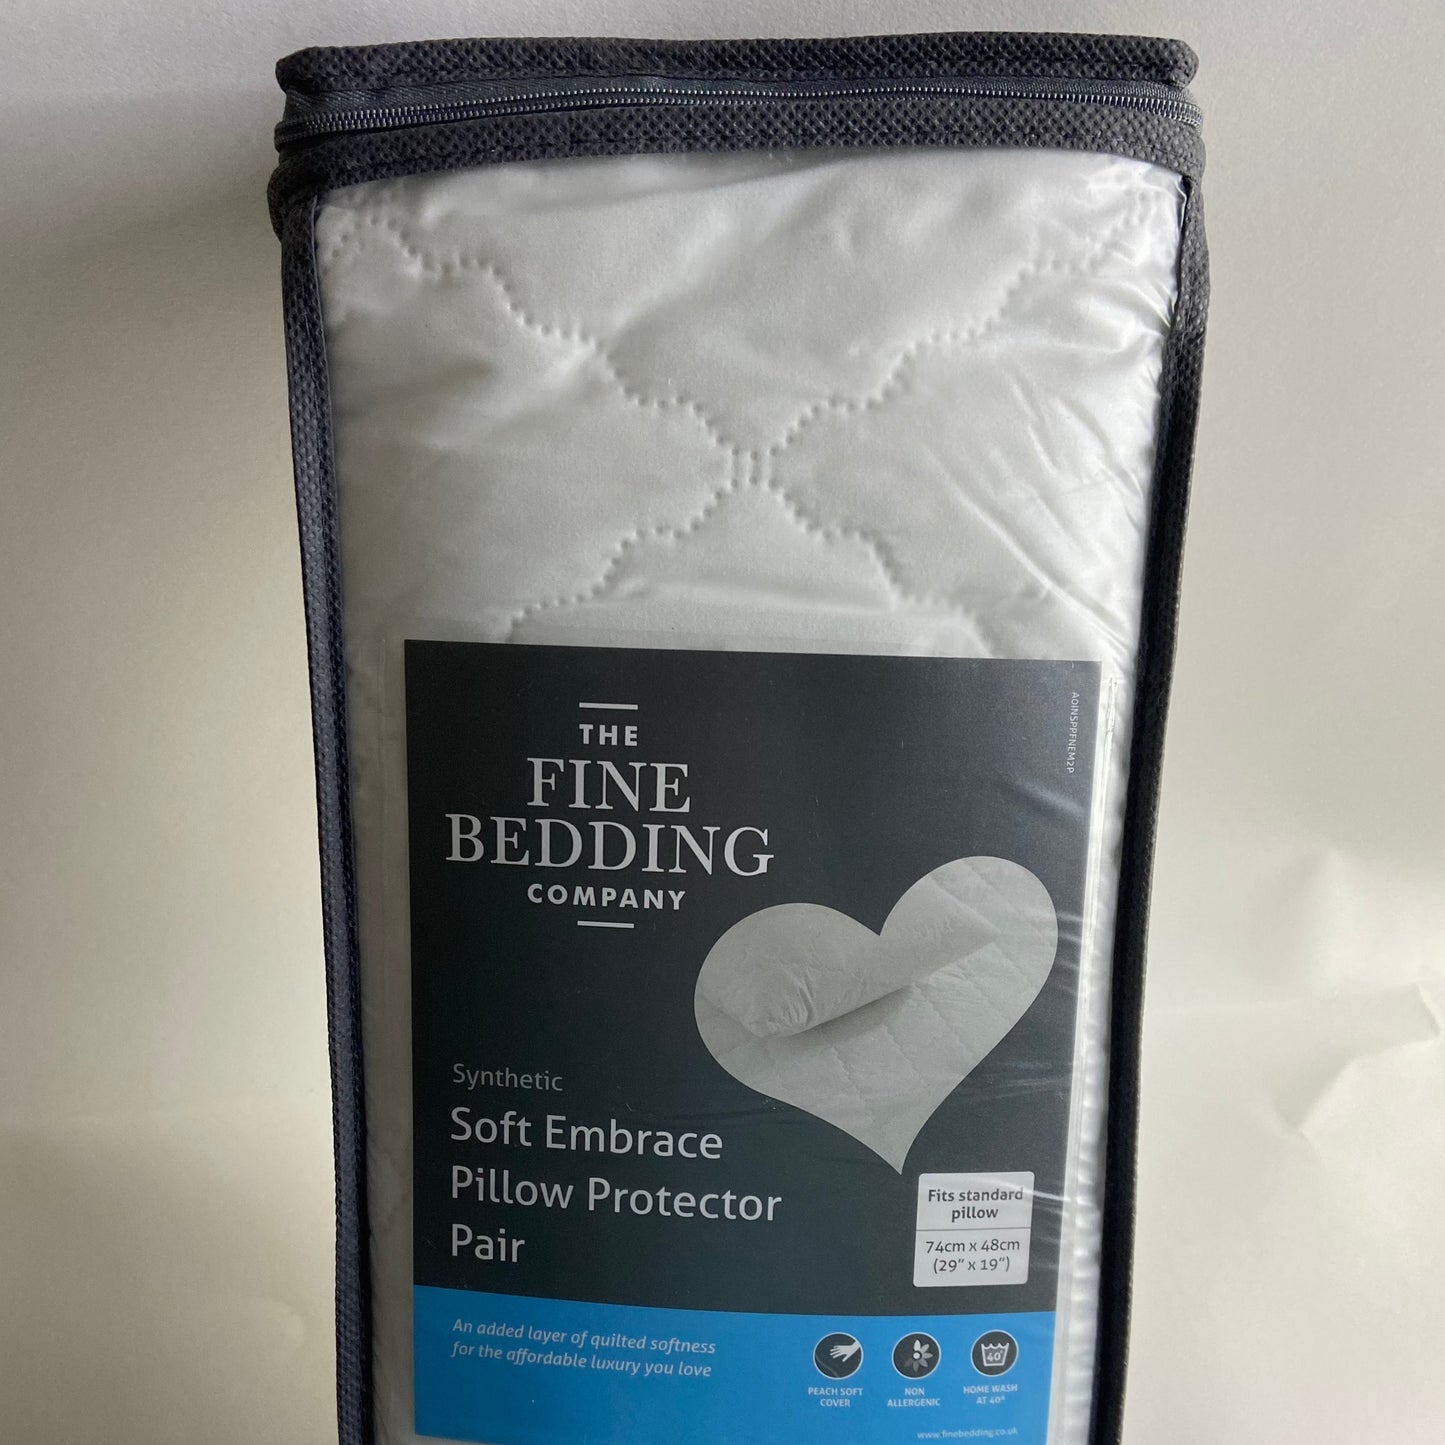 Soft Embrace Pillow Protector Pair by The Fine Bedding Company